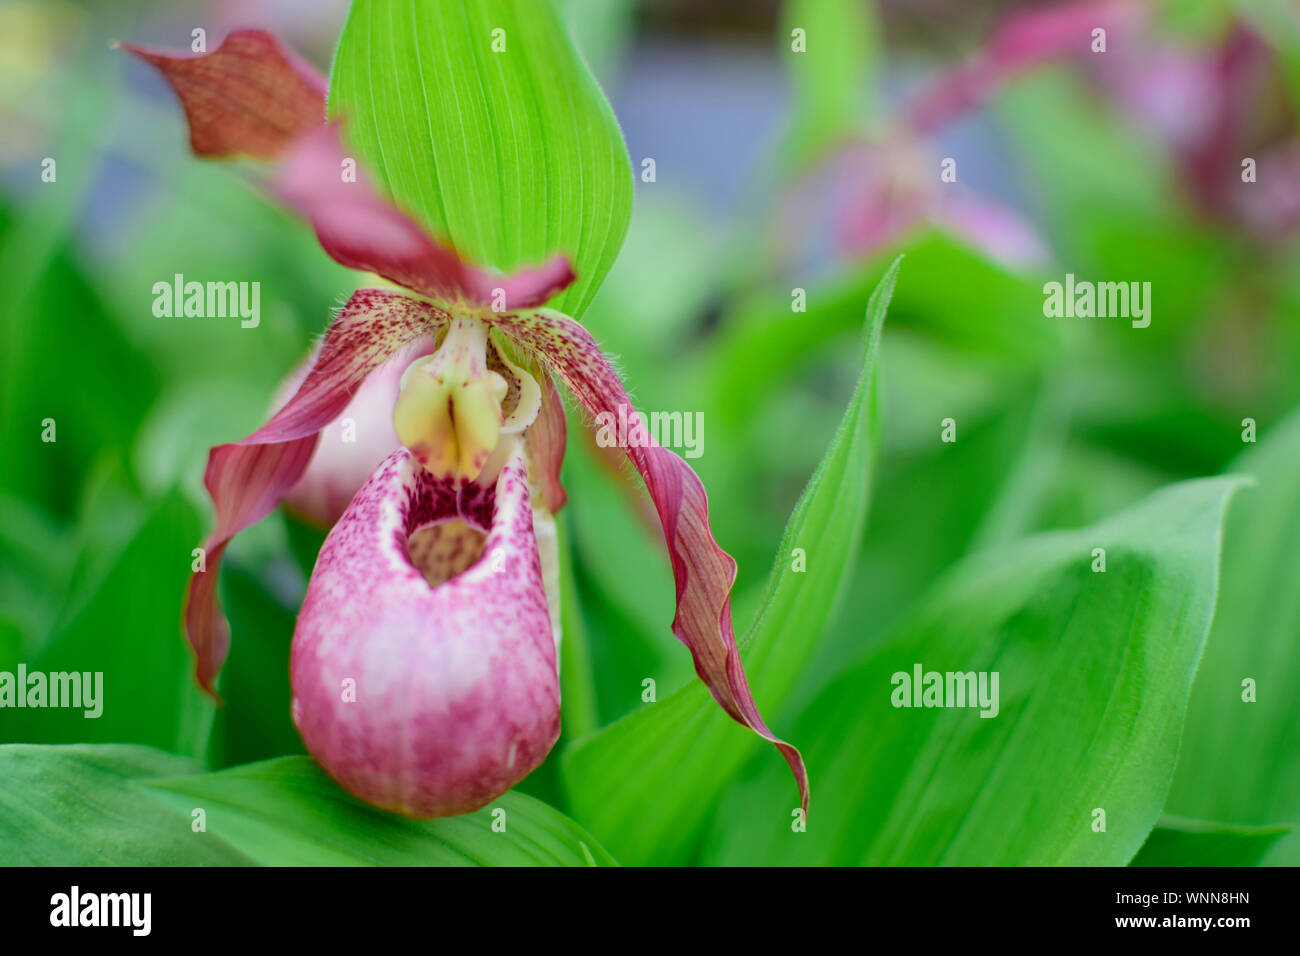 Beautiful of pink Paphiopedilum orchid flower with blurred green leaves background. Nature concept. Stock Photo